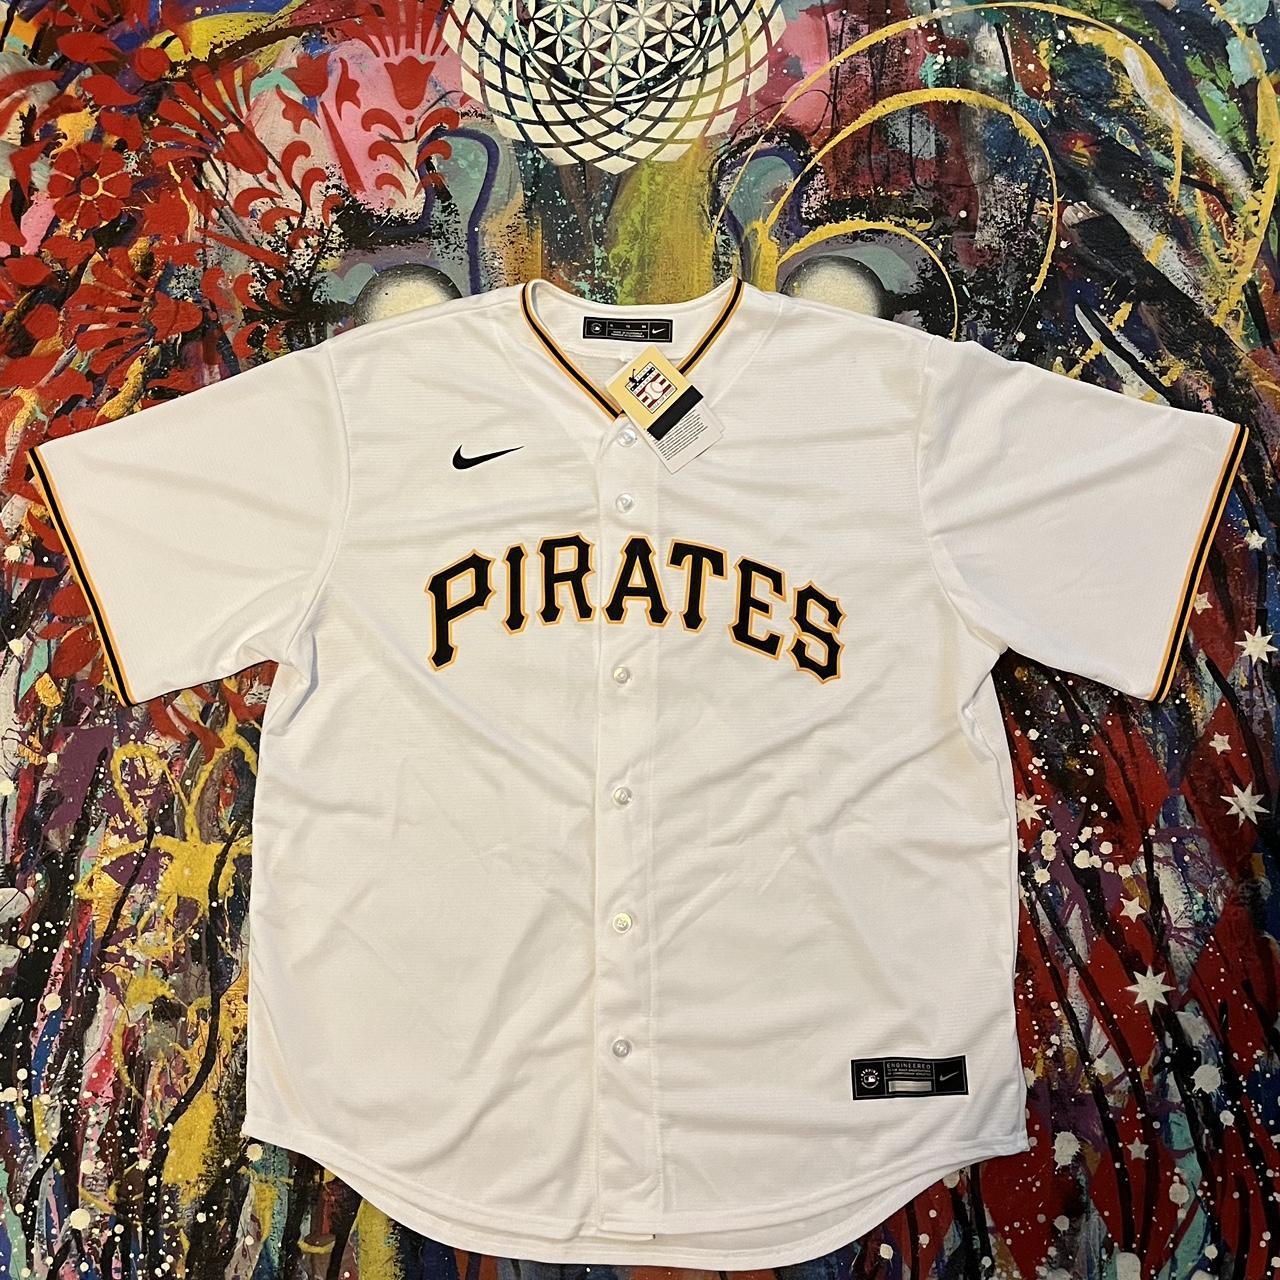 Roberto Clemente jersey by Nike #pirates #pittsburgh - Depop